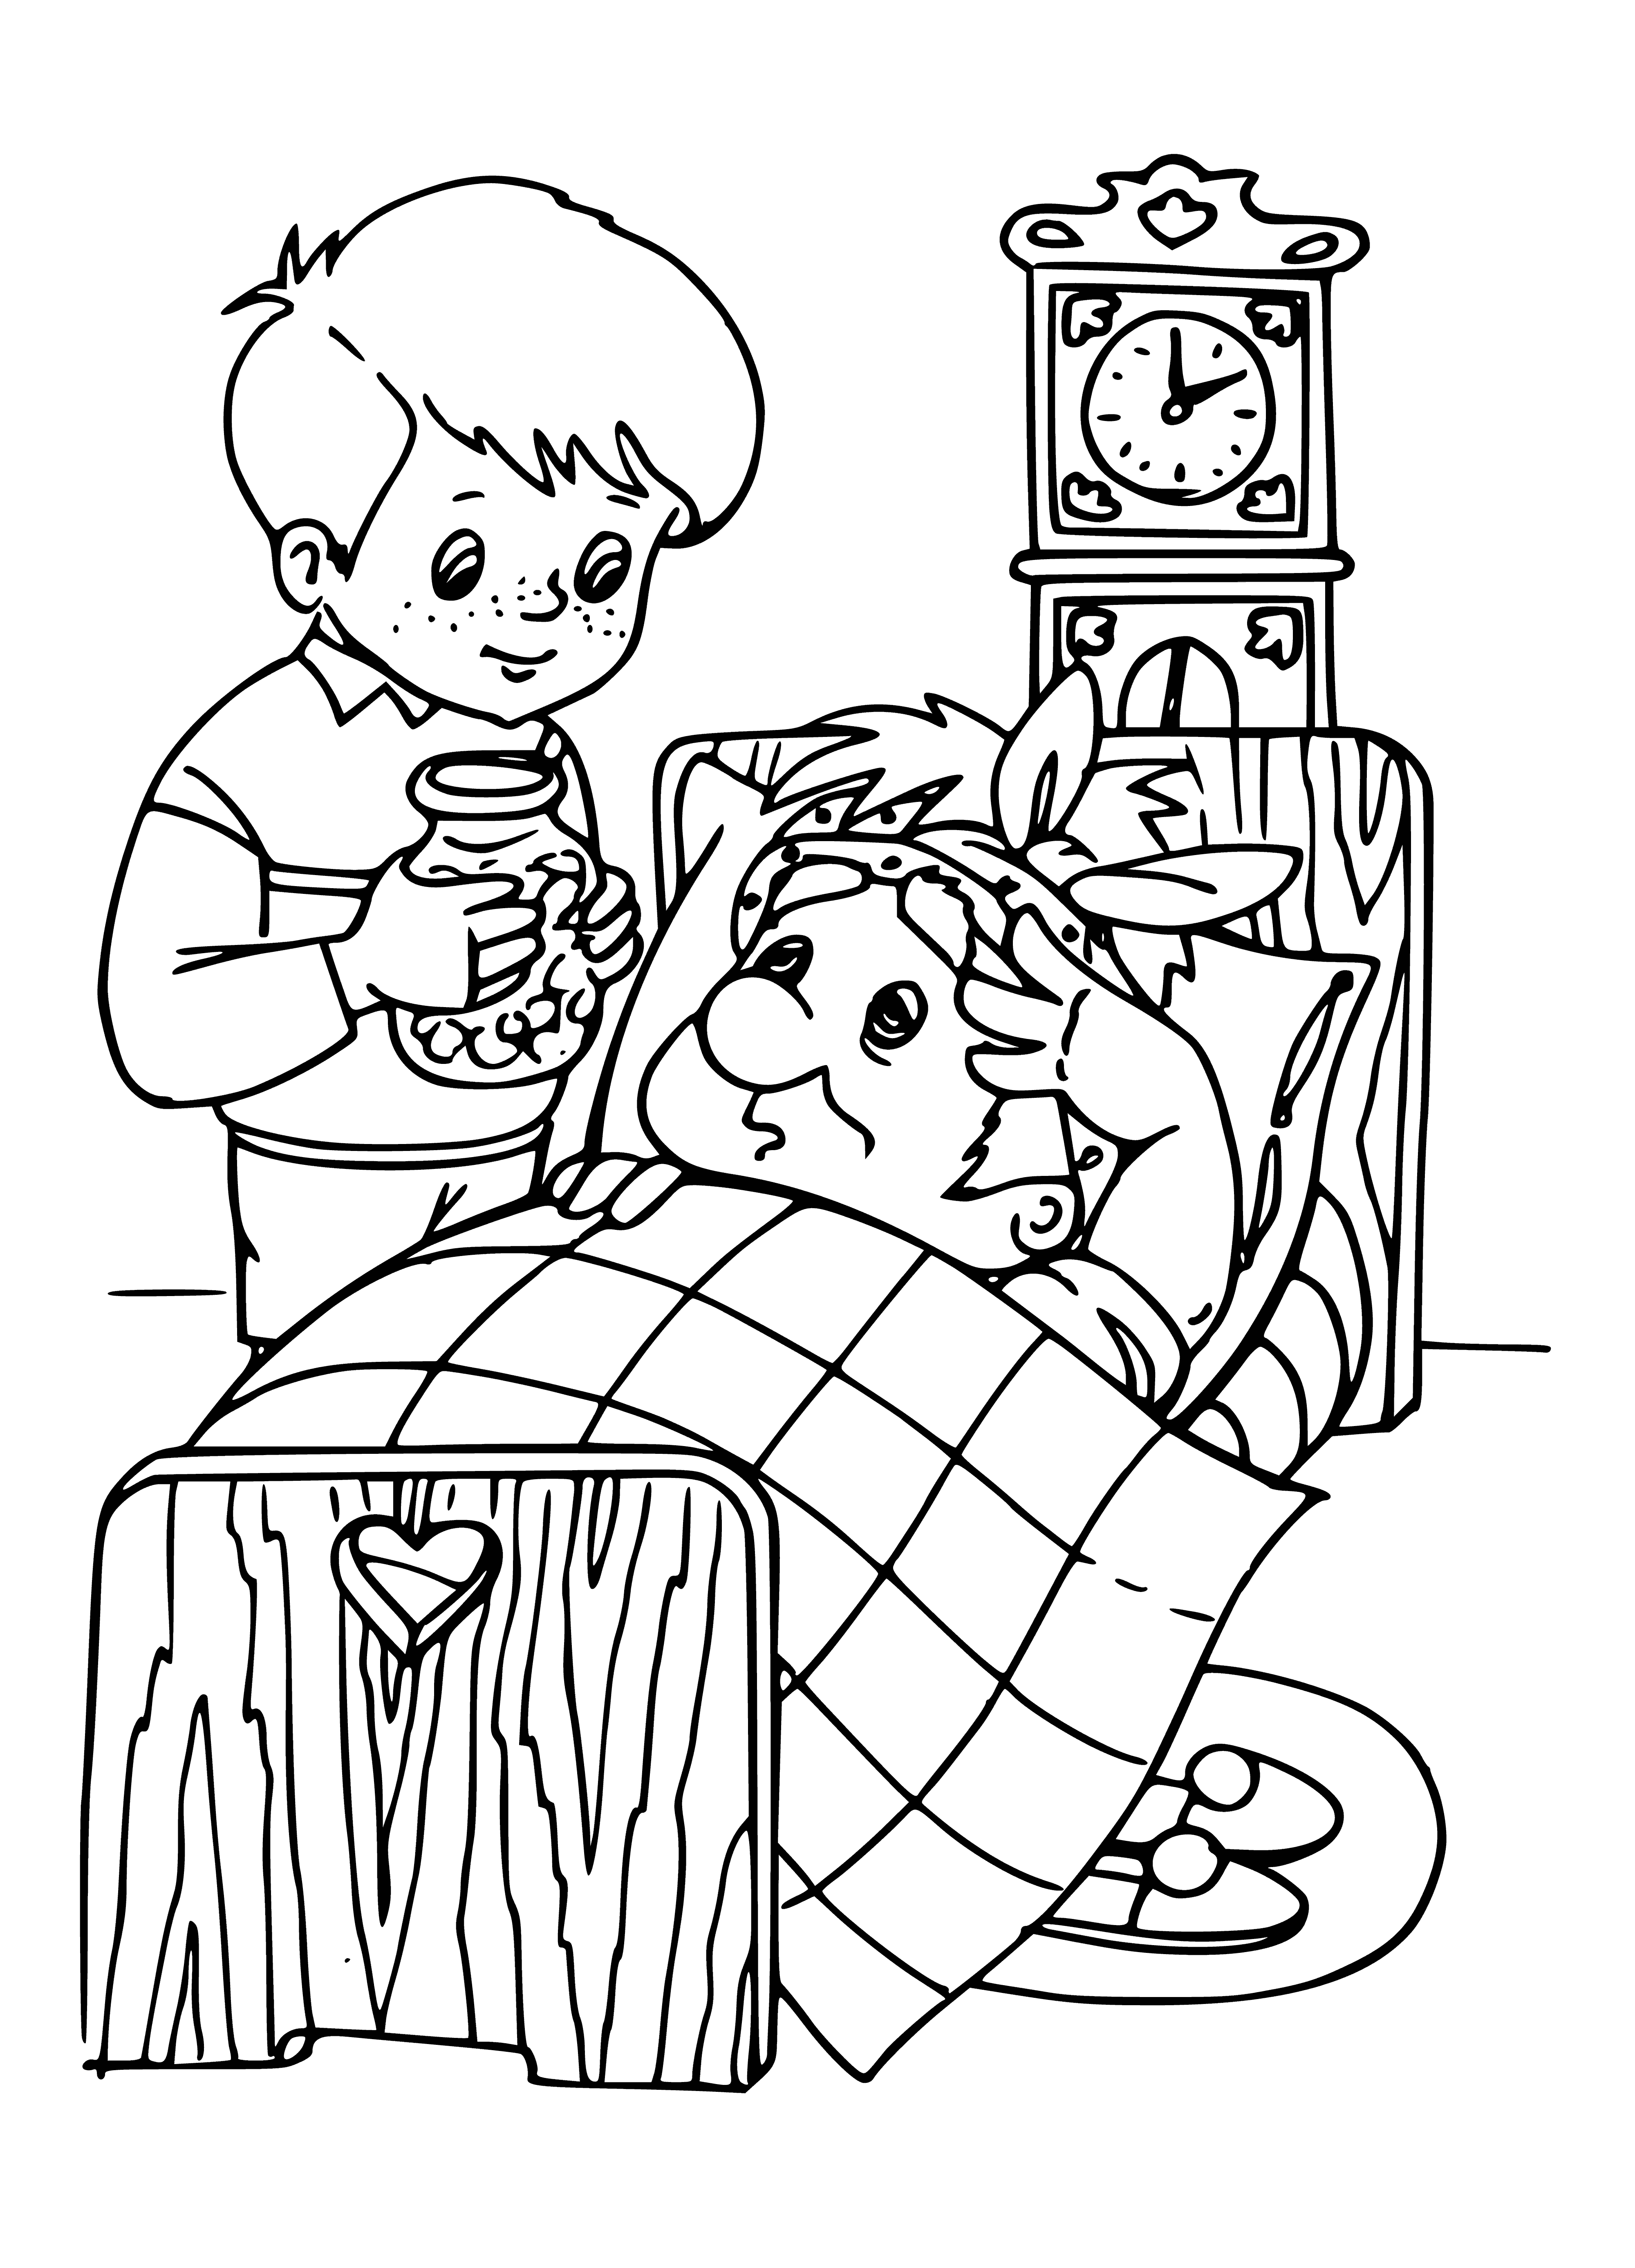 coloring page: Kid & Carlson sitting on a bench; Kid holding cup & thermometer; Carlson has head in his hands.